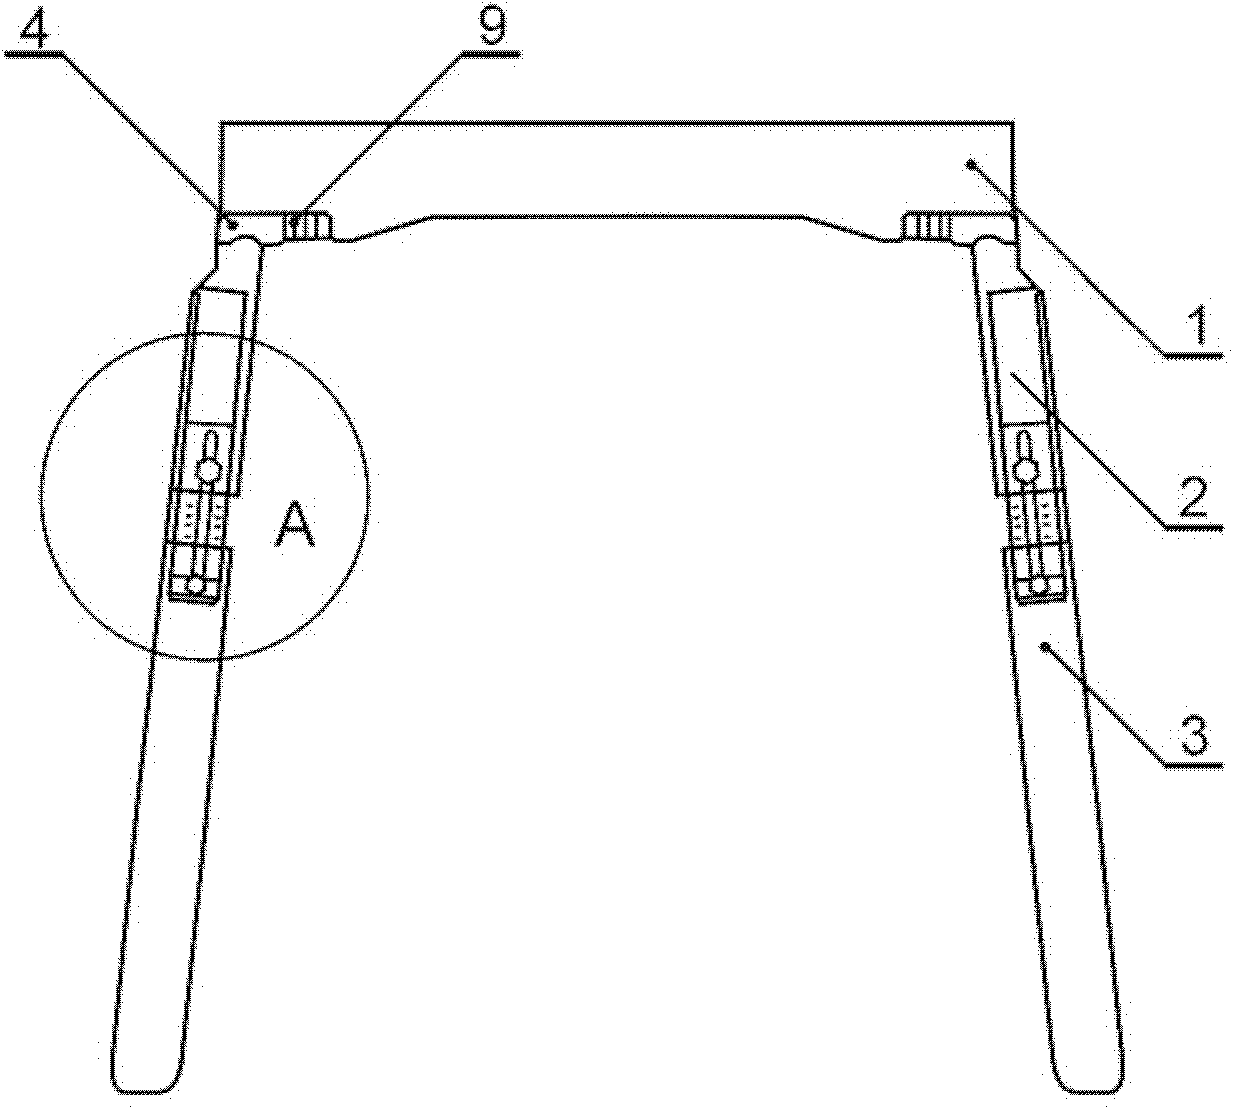 Retractable trapezoid support with cushion blocks